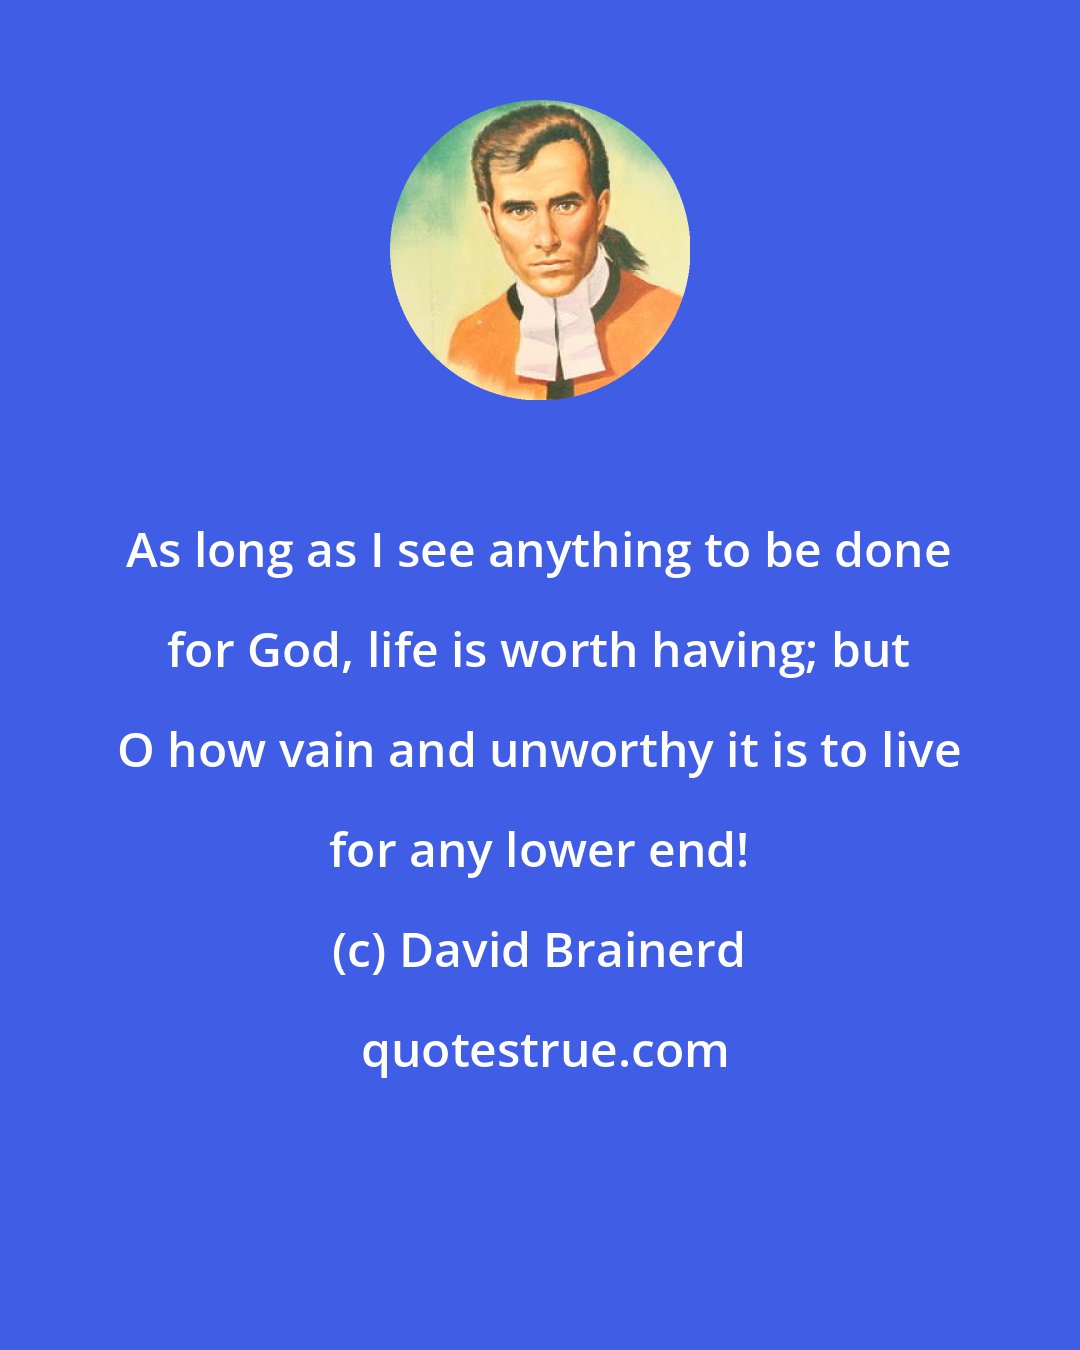 David Brainerd: As long as I see anything to be done for God, life is worth having; but O how vain and unworthy it is to live for any lower end!